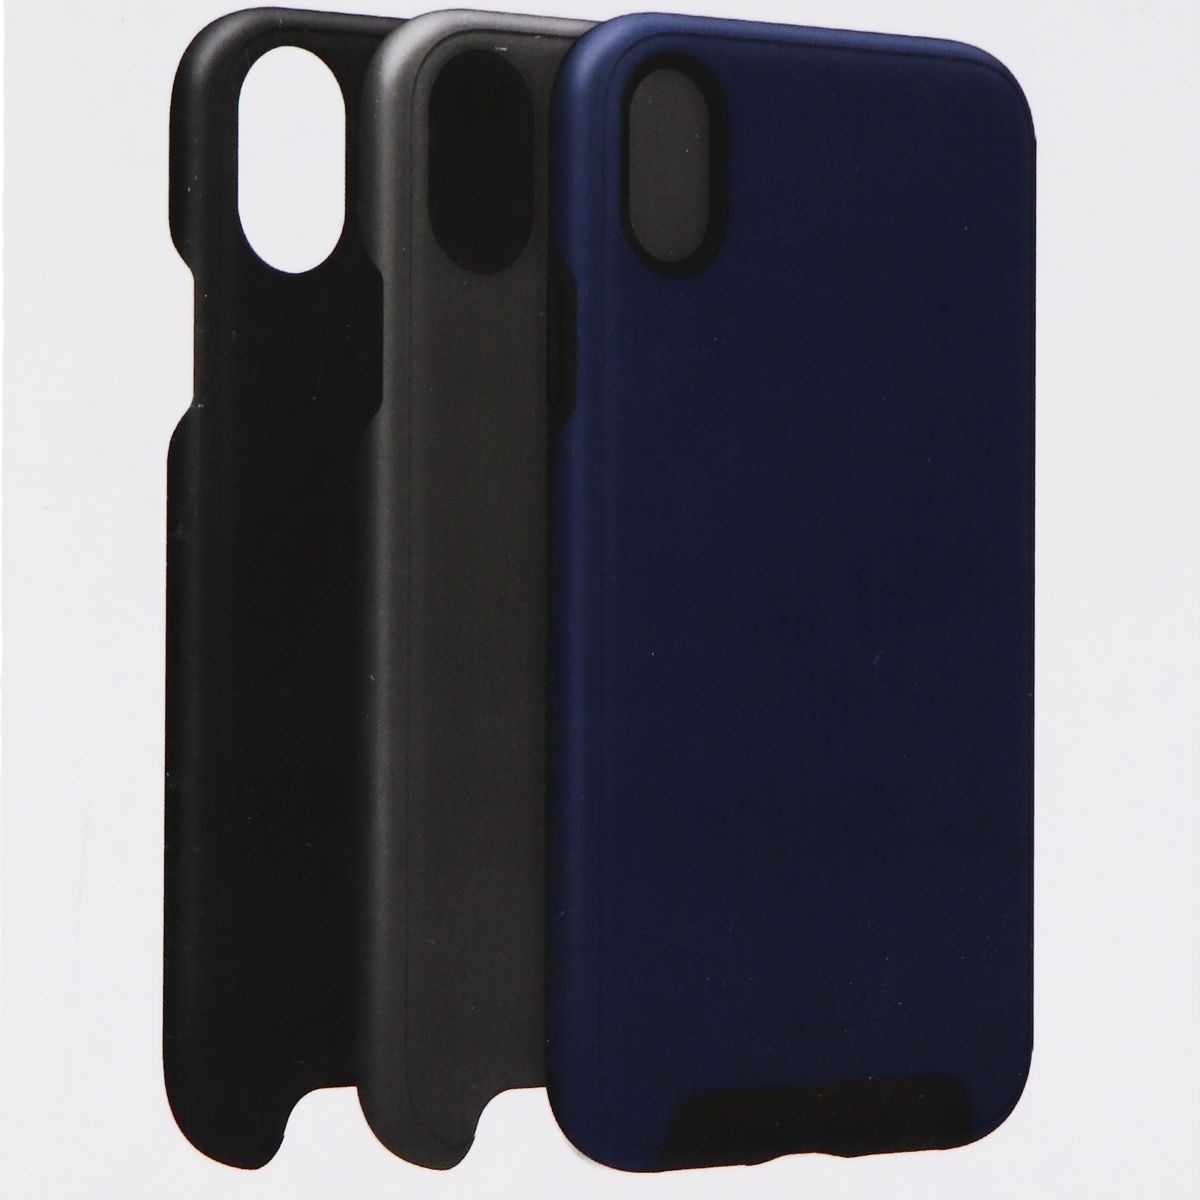 Nimbus9 LifeStyle Kit Cases (3 Pack) For IPhone Xs & X - Blue, Gray, Black